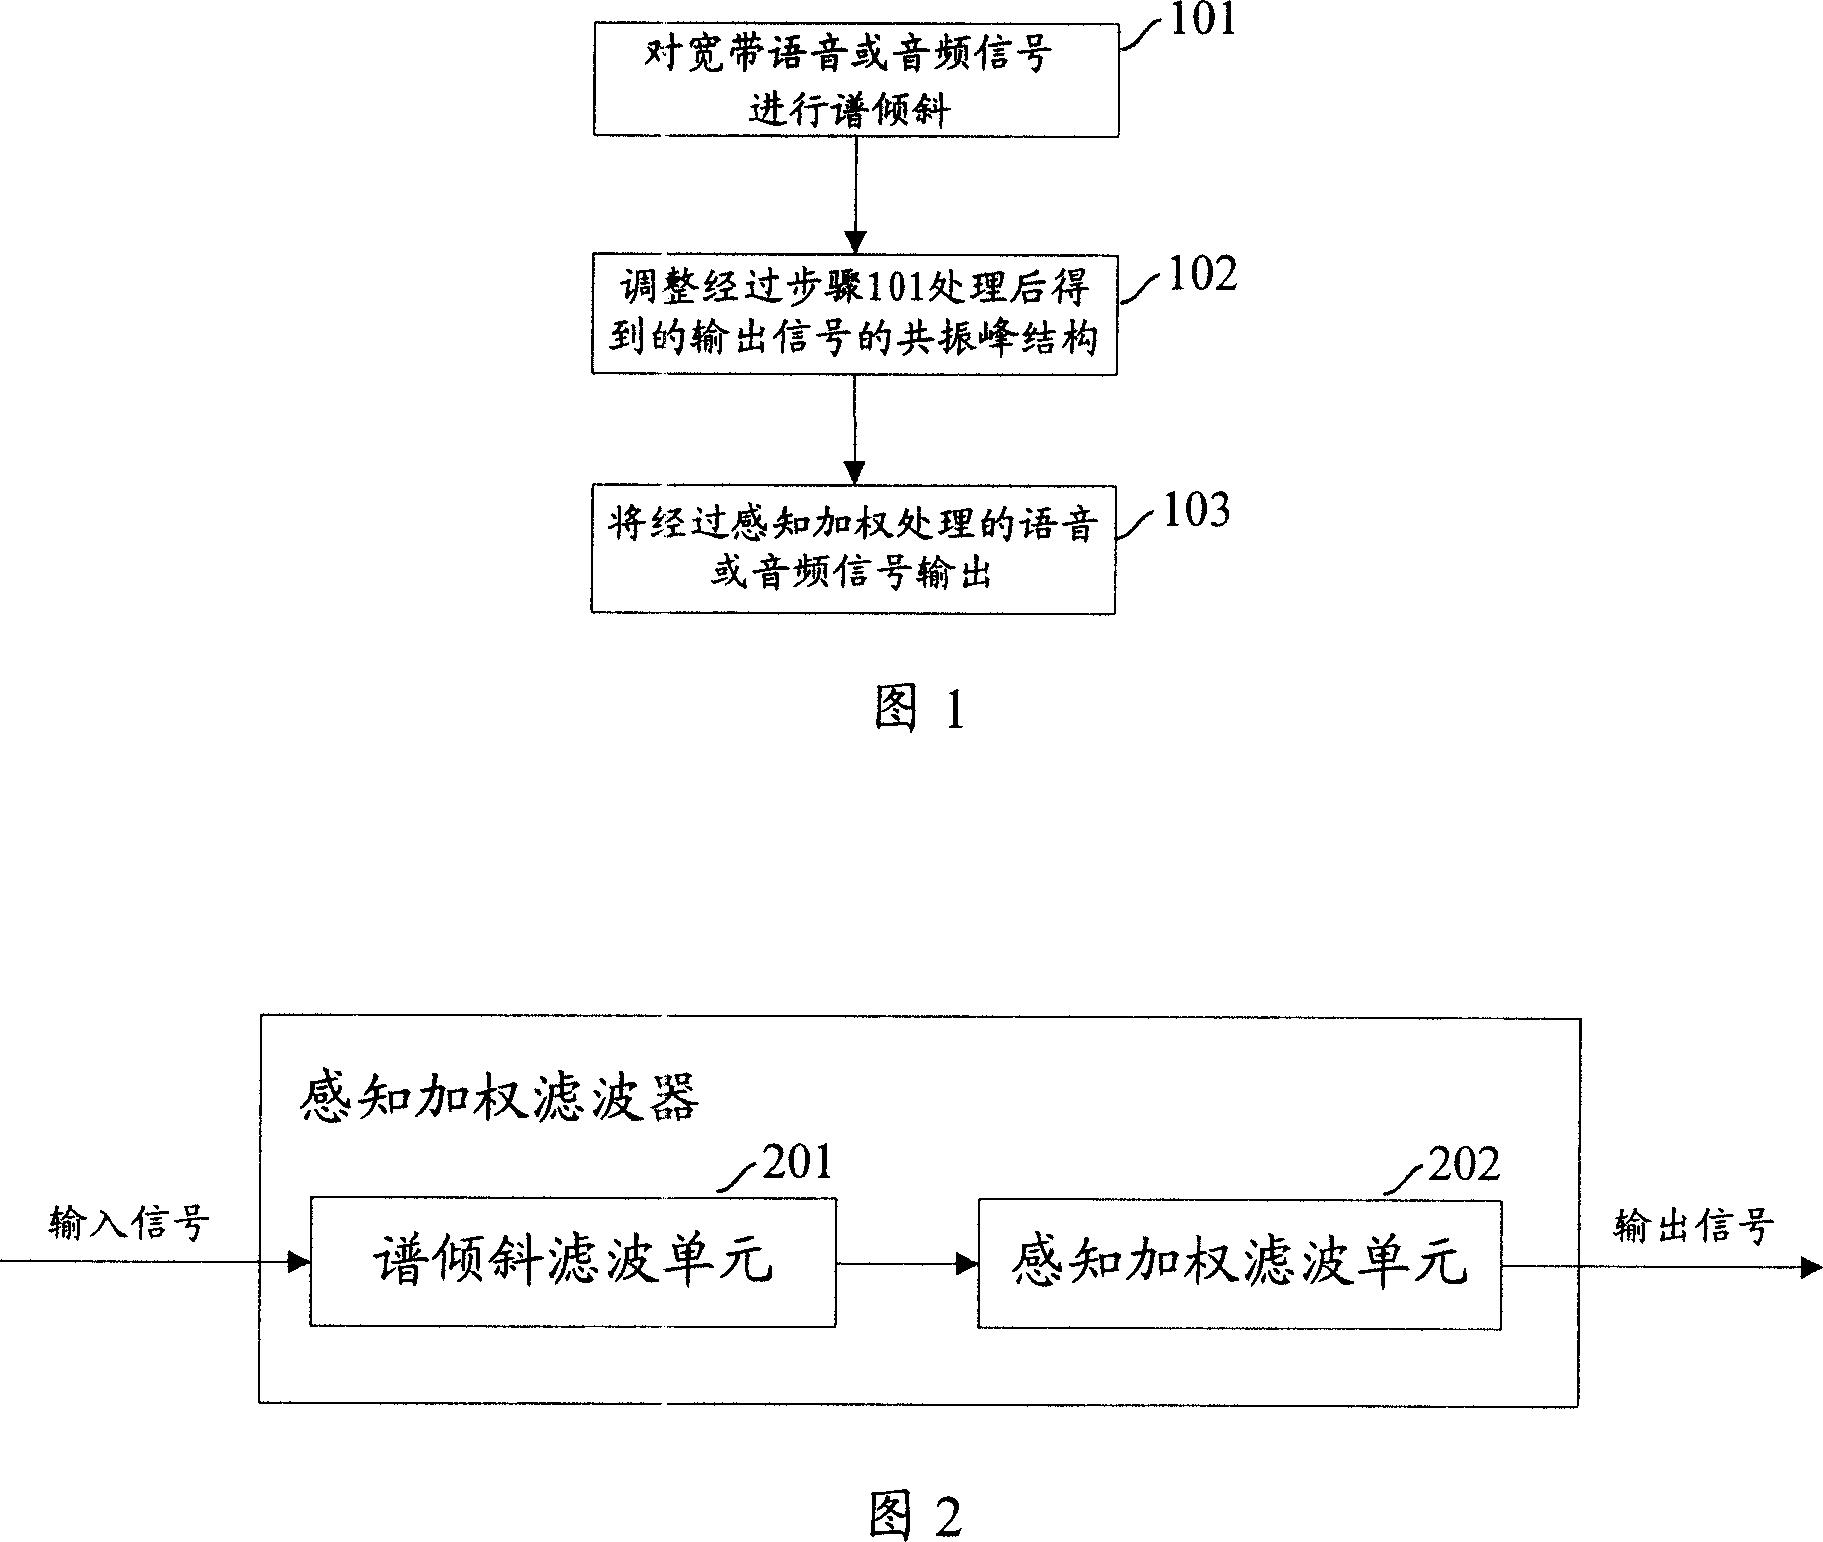 Perception weighting filtering wave method and perception weighting filter thererof